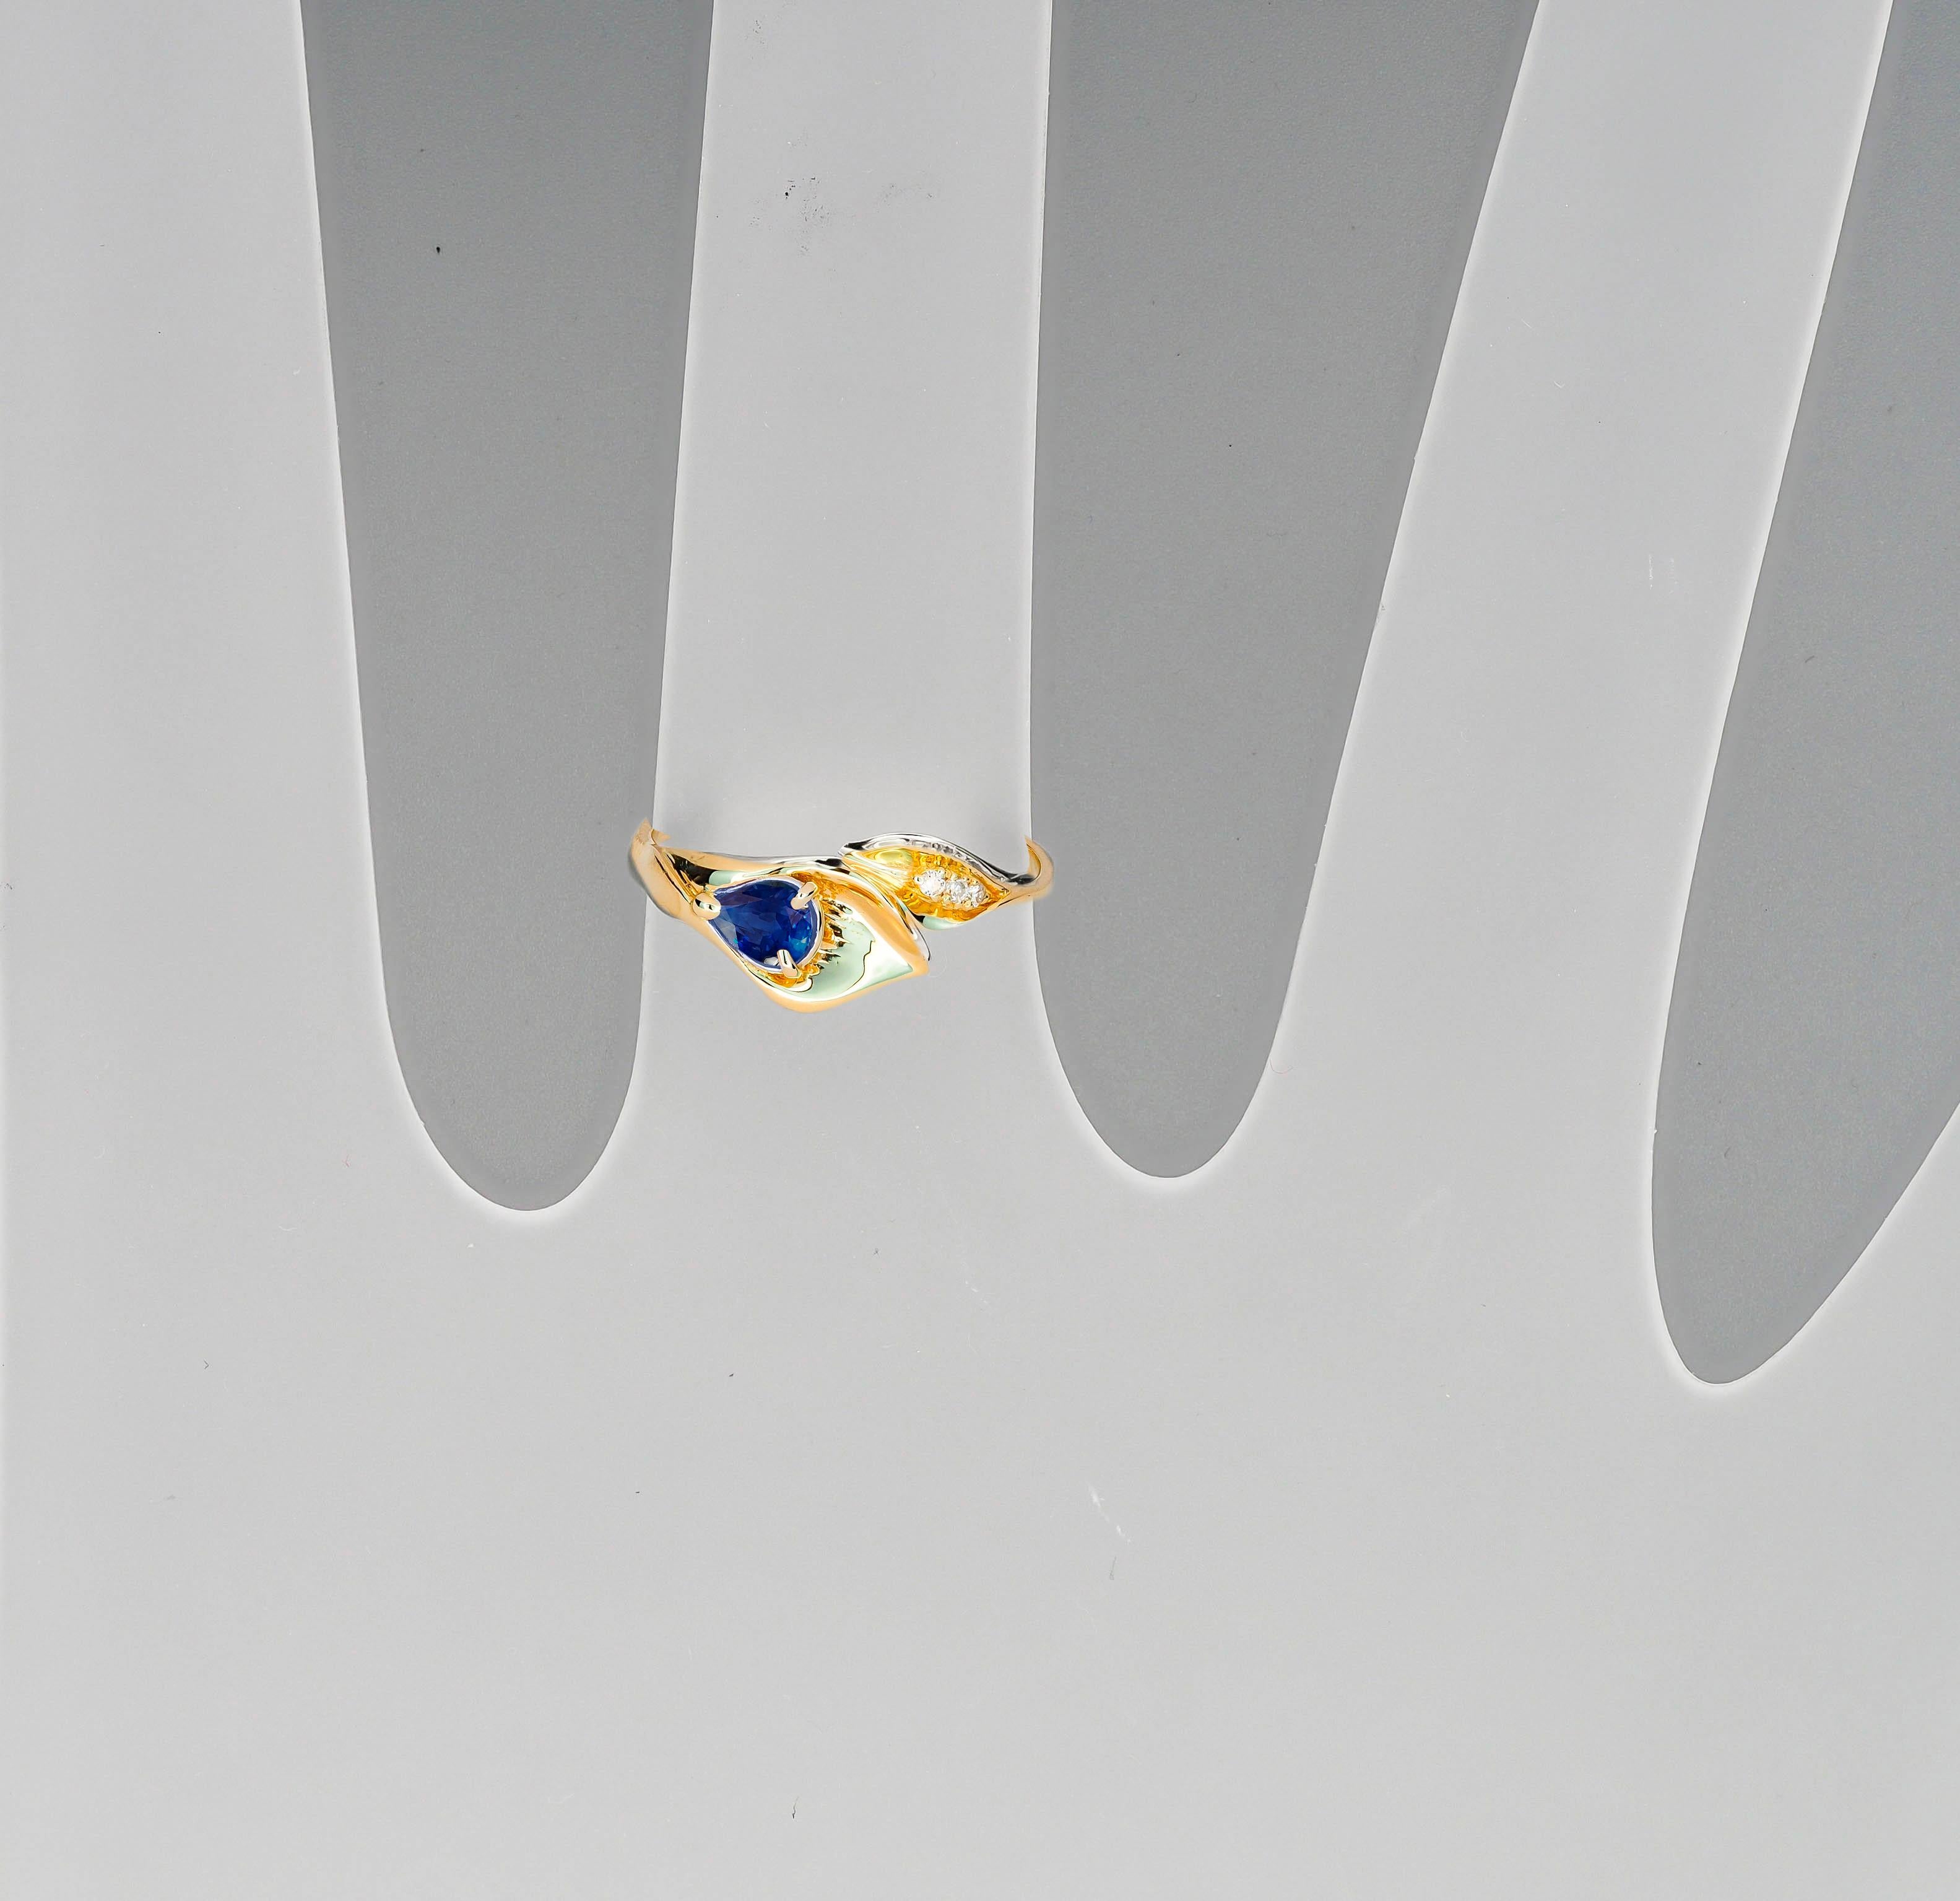 For Sale:  Lily Calla Gold Ring, 14 Karat Gold Ring with Sapphire and Diamonds 6